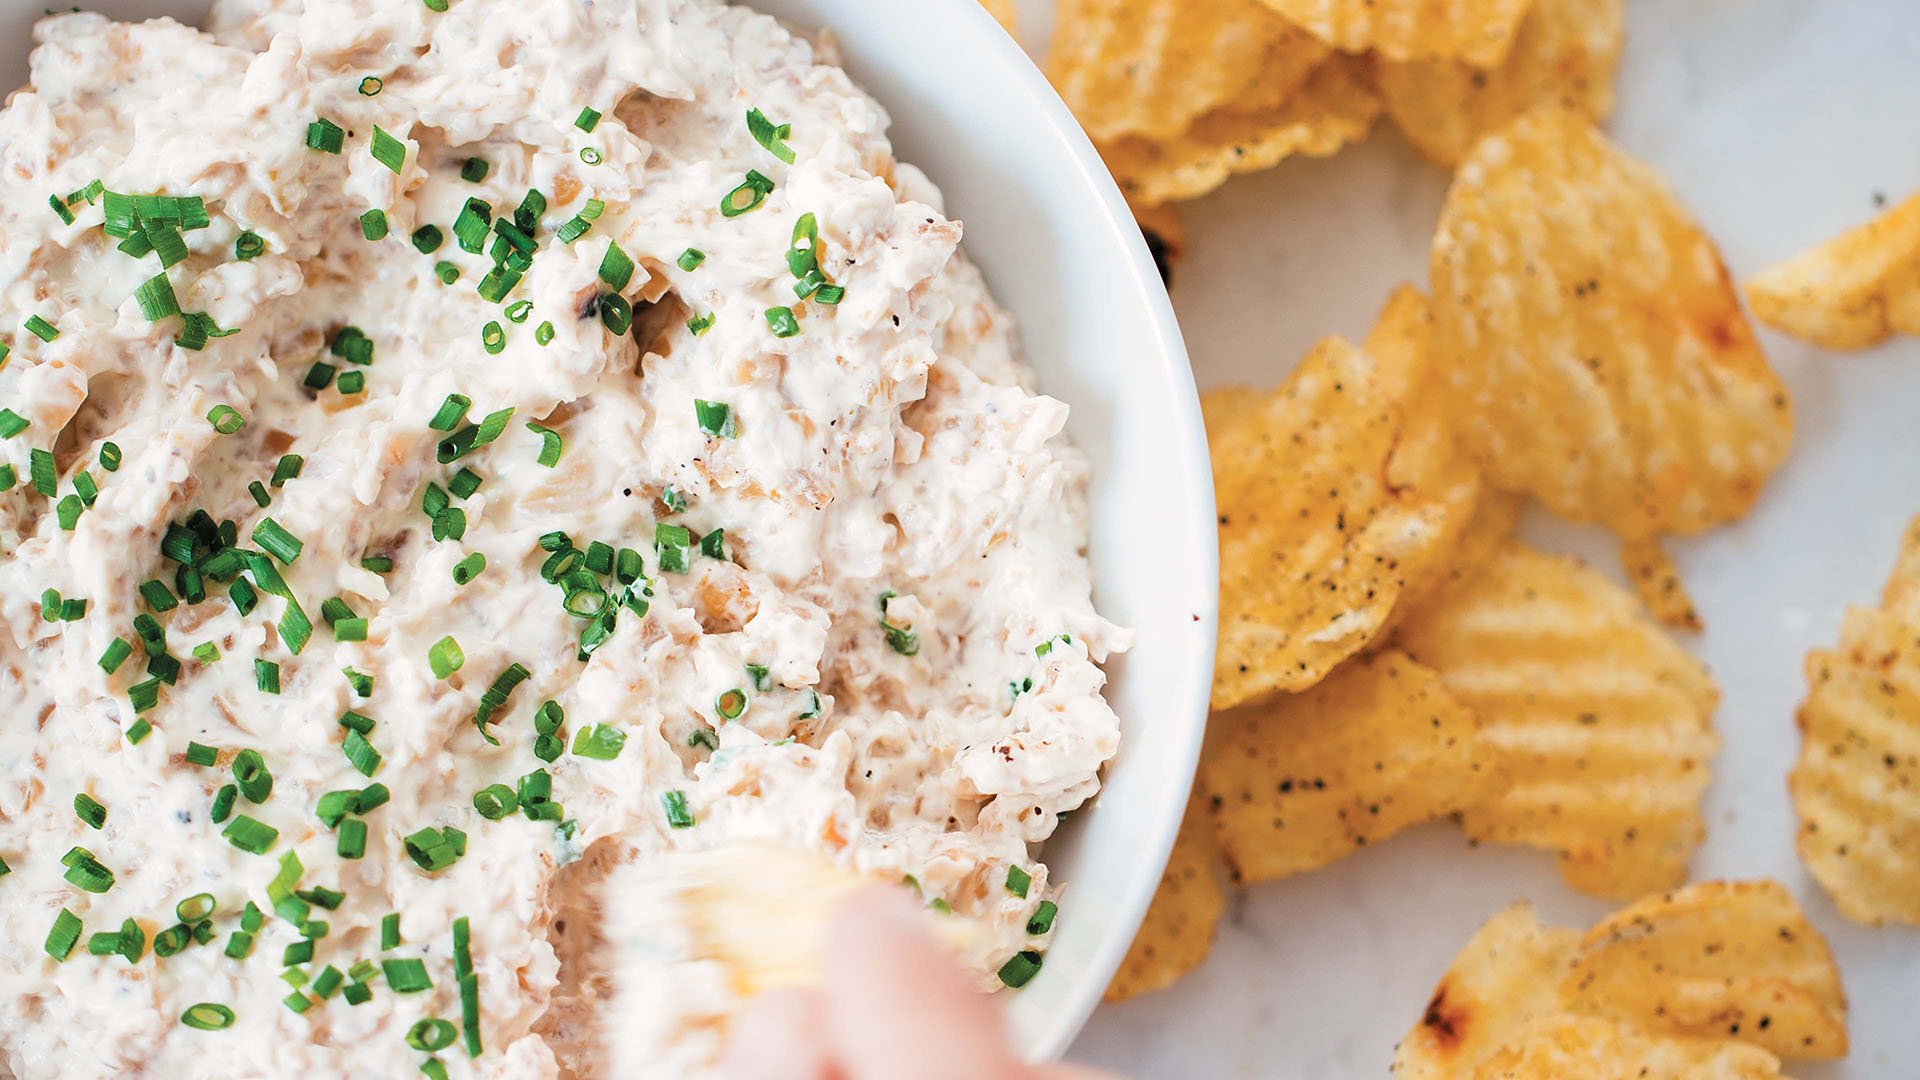 Four-Onion Dip recipe Excerpted from Onions Etcetera: The Essential Allium Cookbook by Kate Winslow and Guy Ambrosino. Copyright © 2017 by Kate Winslow and Guy Ambrosino. Published by Burgess Lea Press.